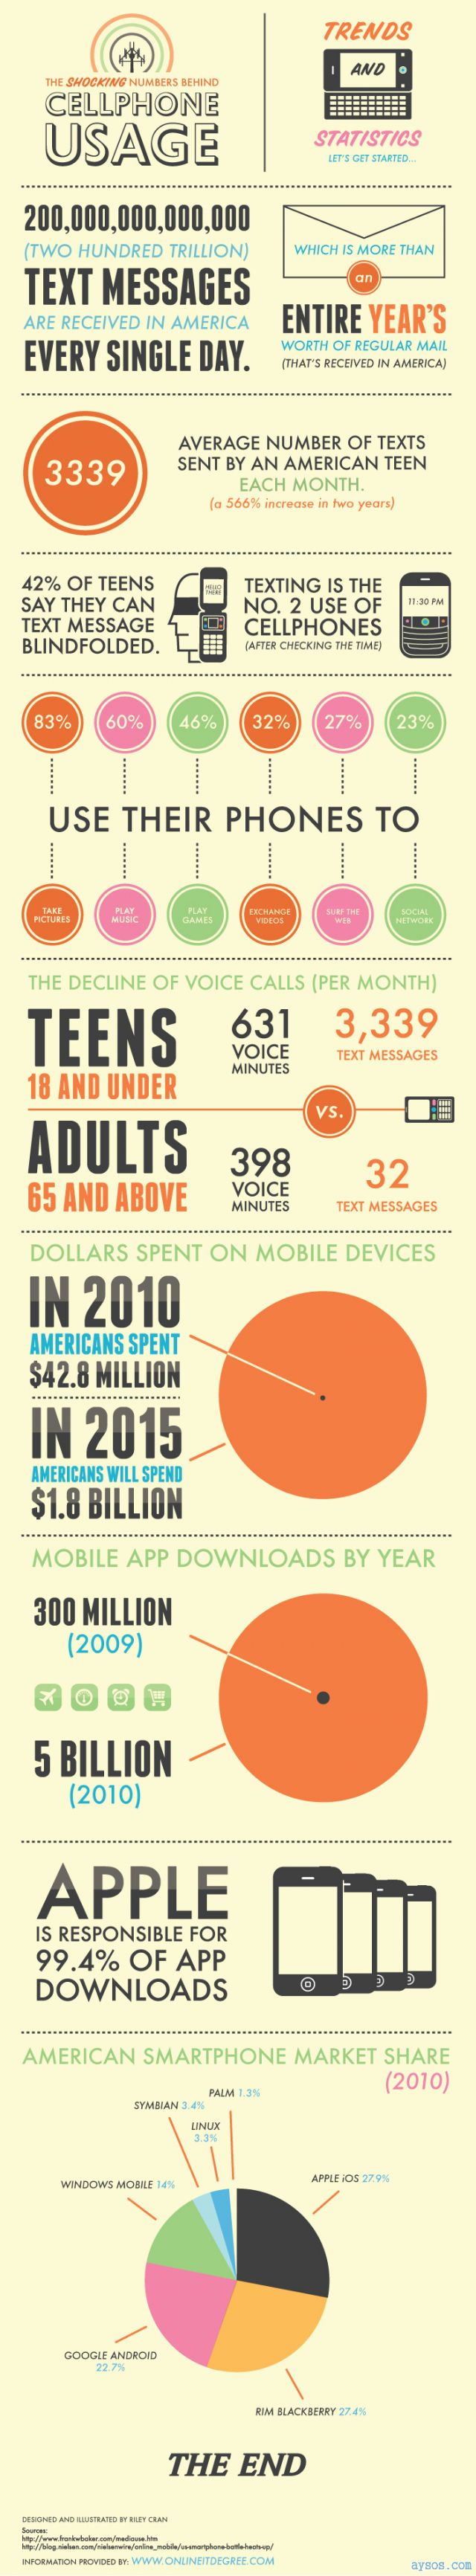 Amazing Information on Cellphone Usage